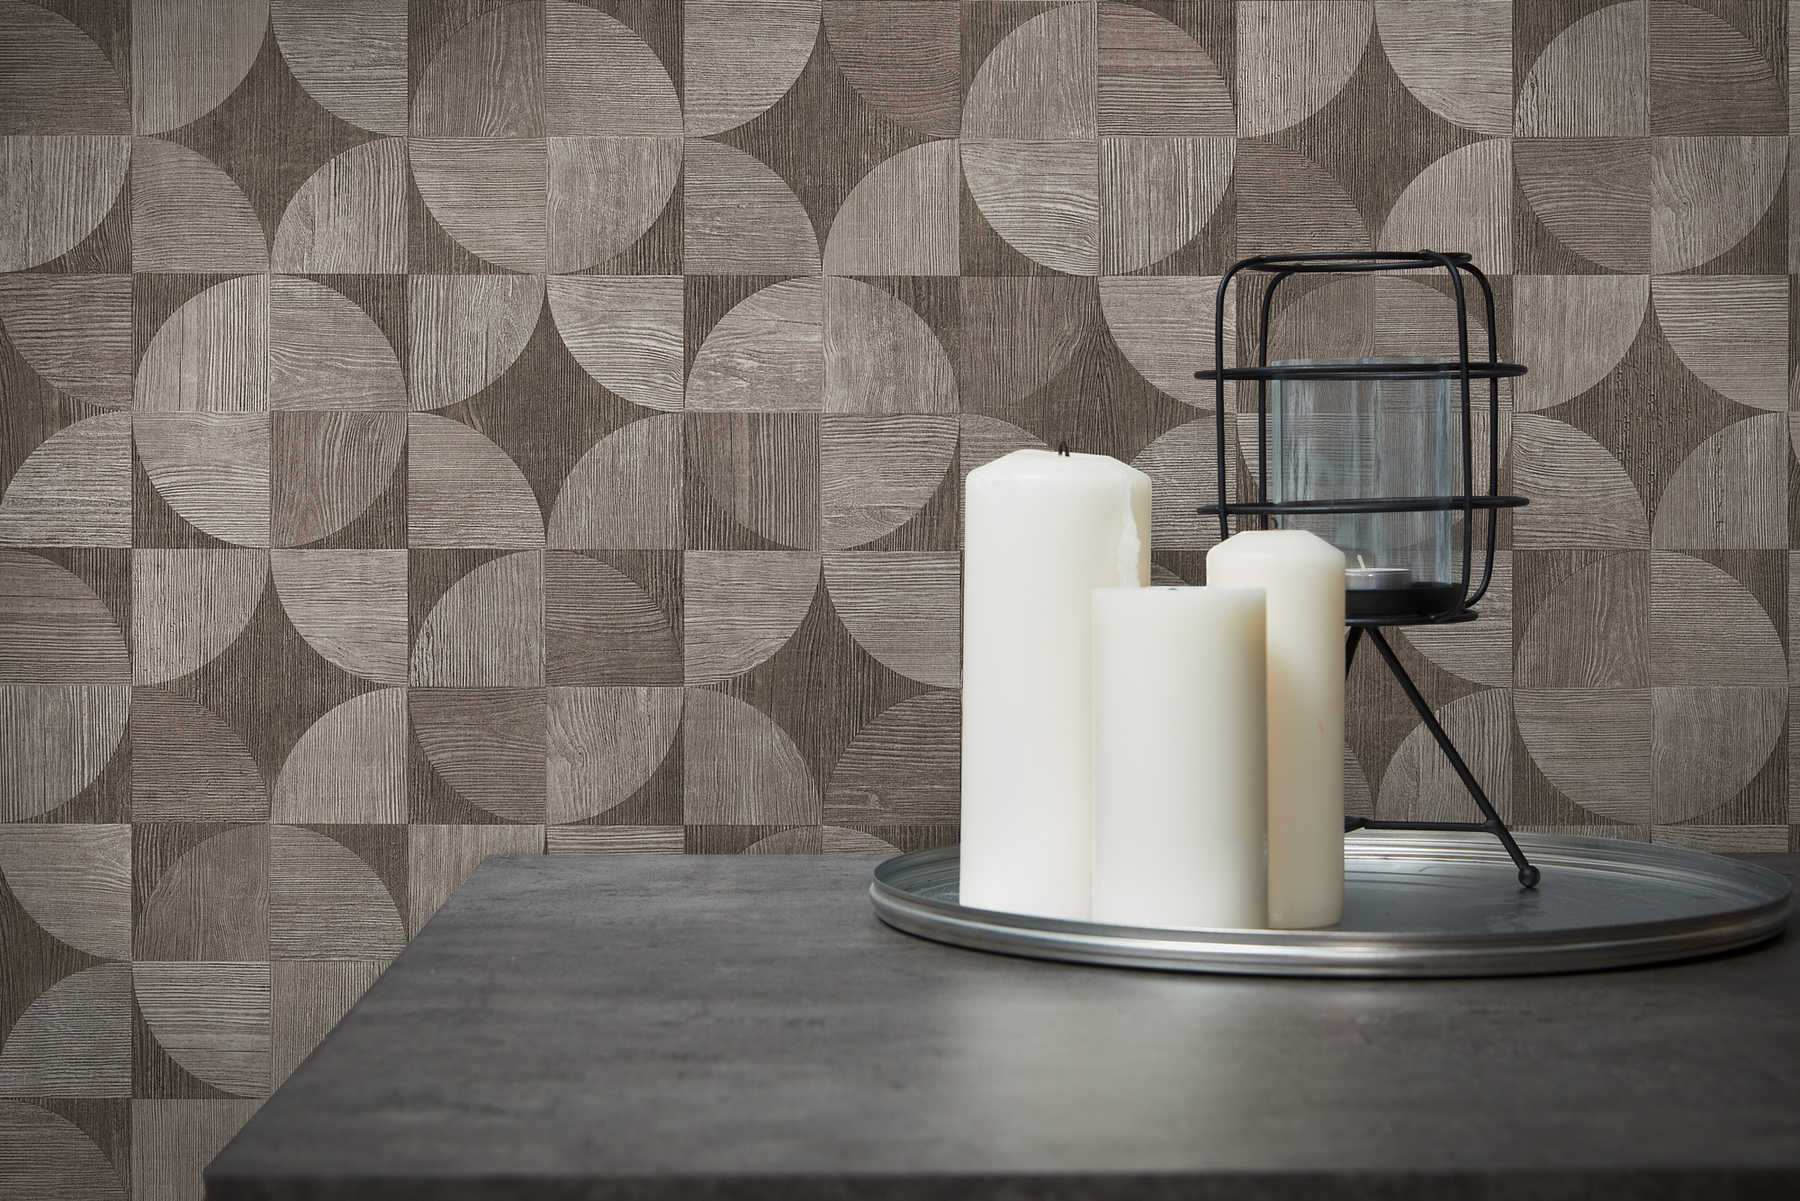             Wallpaper with graphic pattern in wood look - grey, brown
        